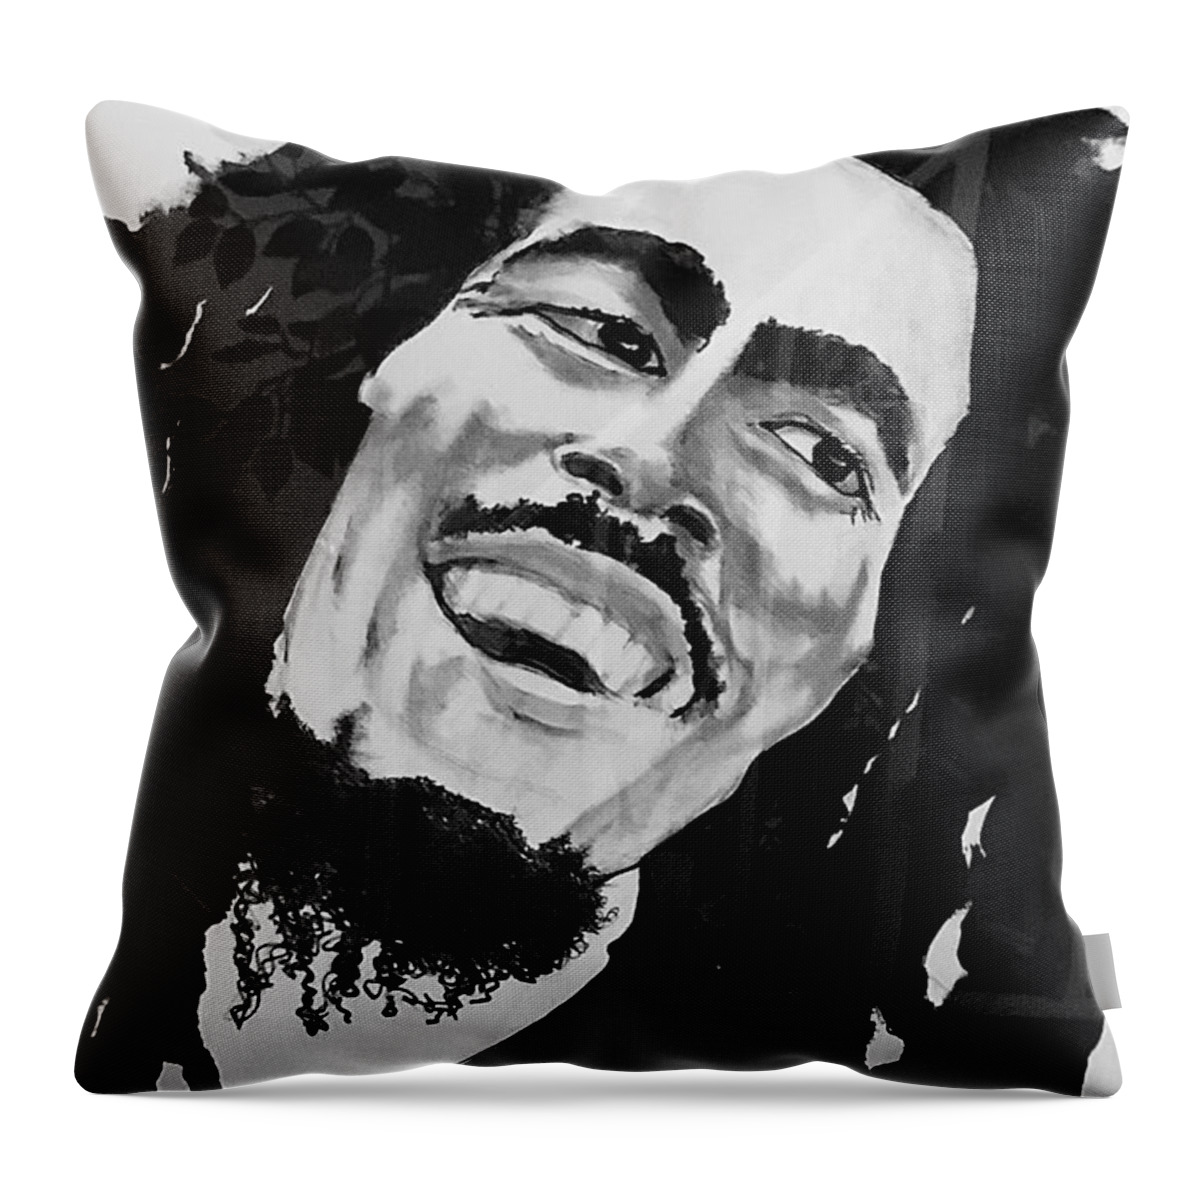  Throw Pillow featuring the drawing One Love by Angie ONeal